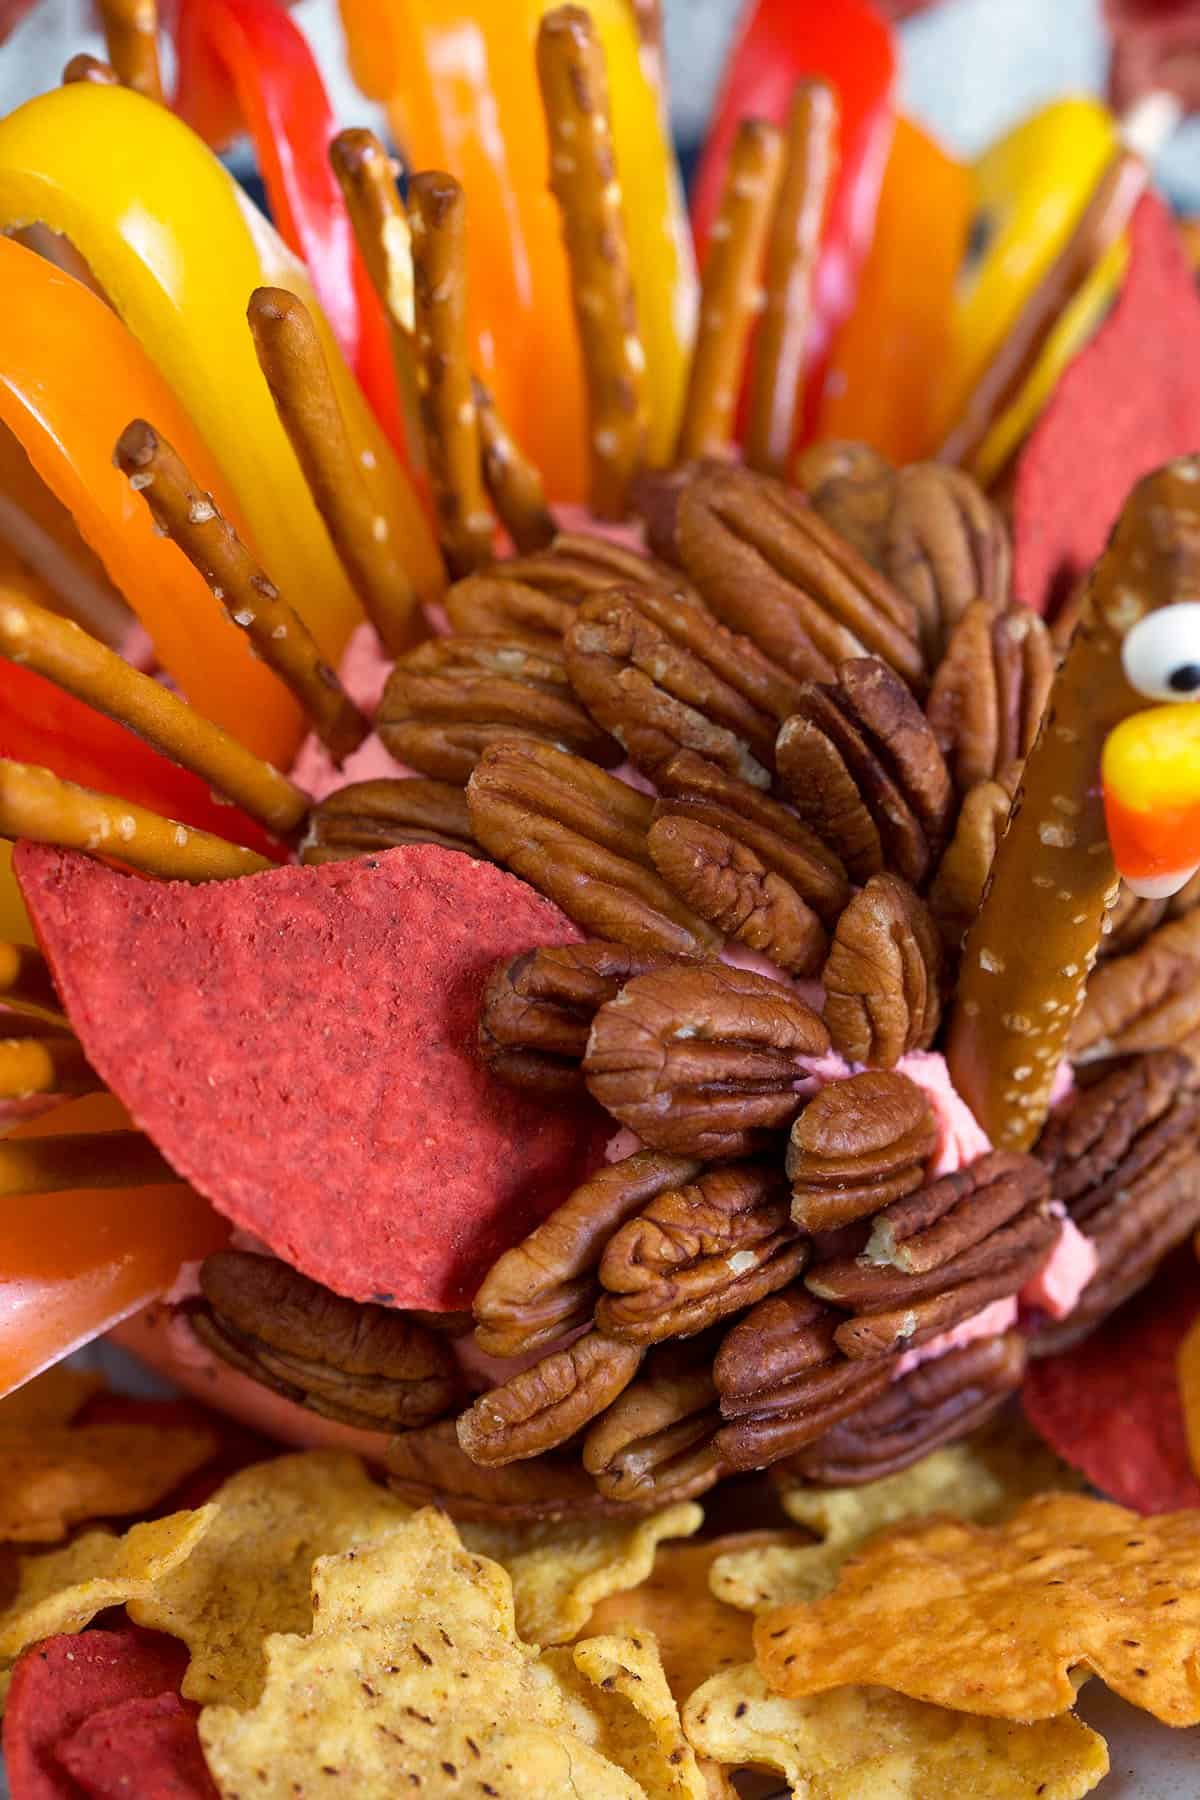 A close up picture shows the pecans and chips on a cheese ball.